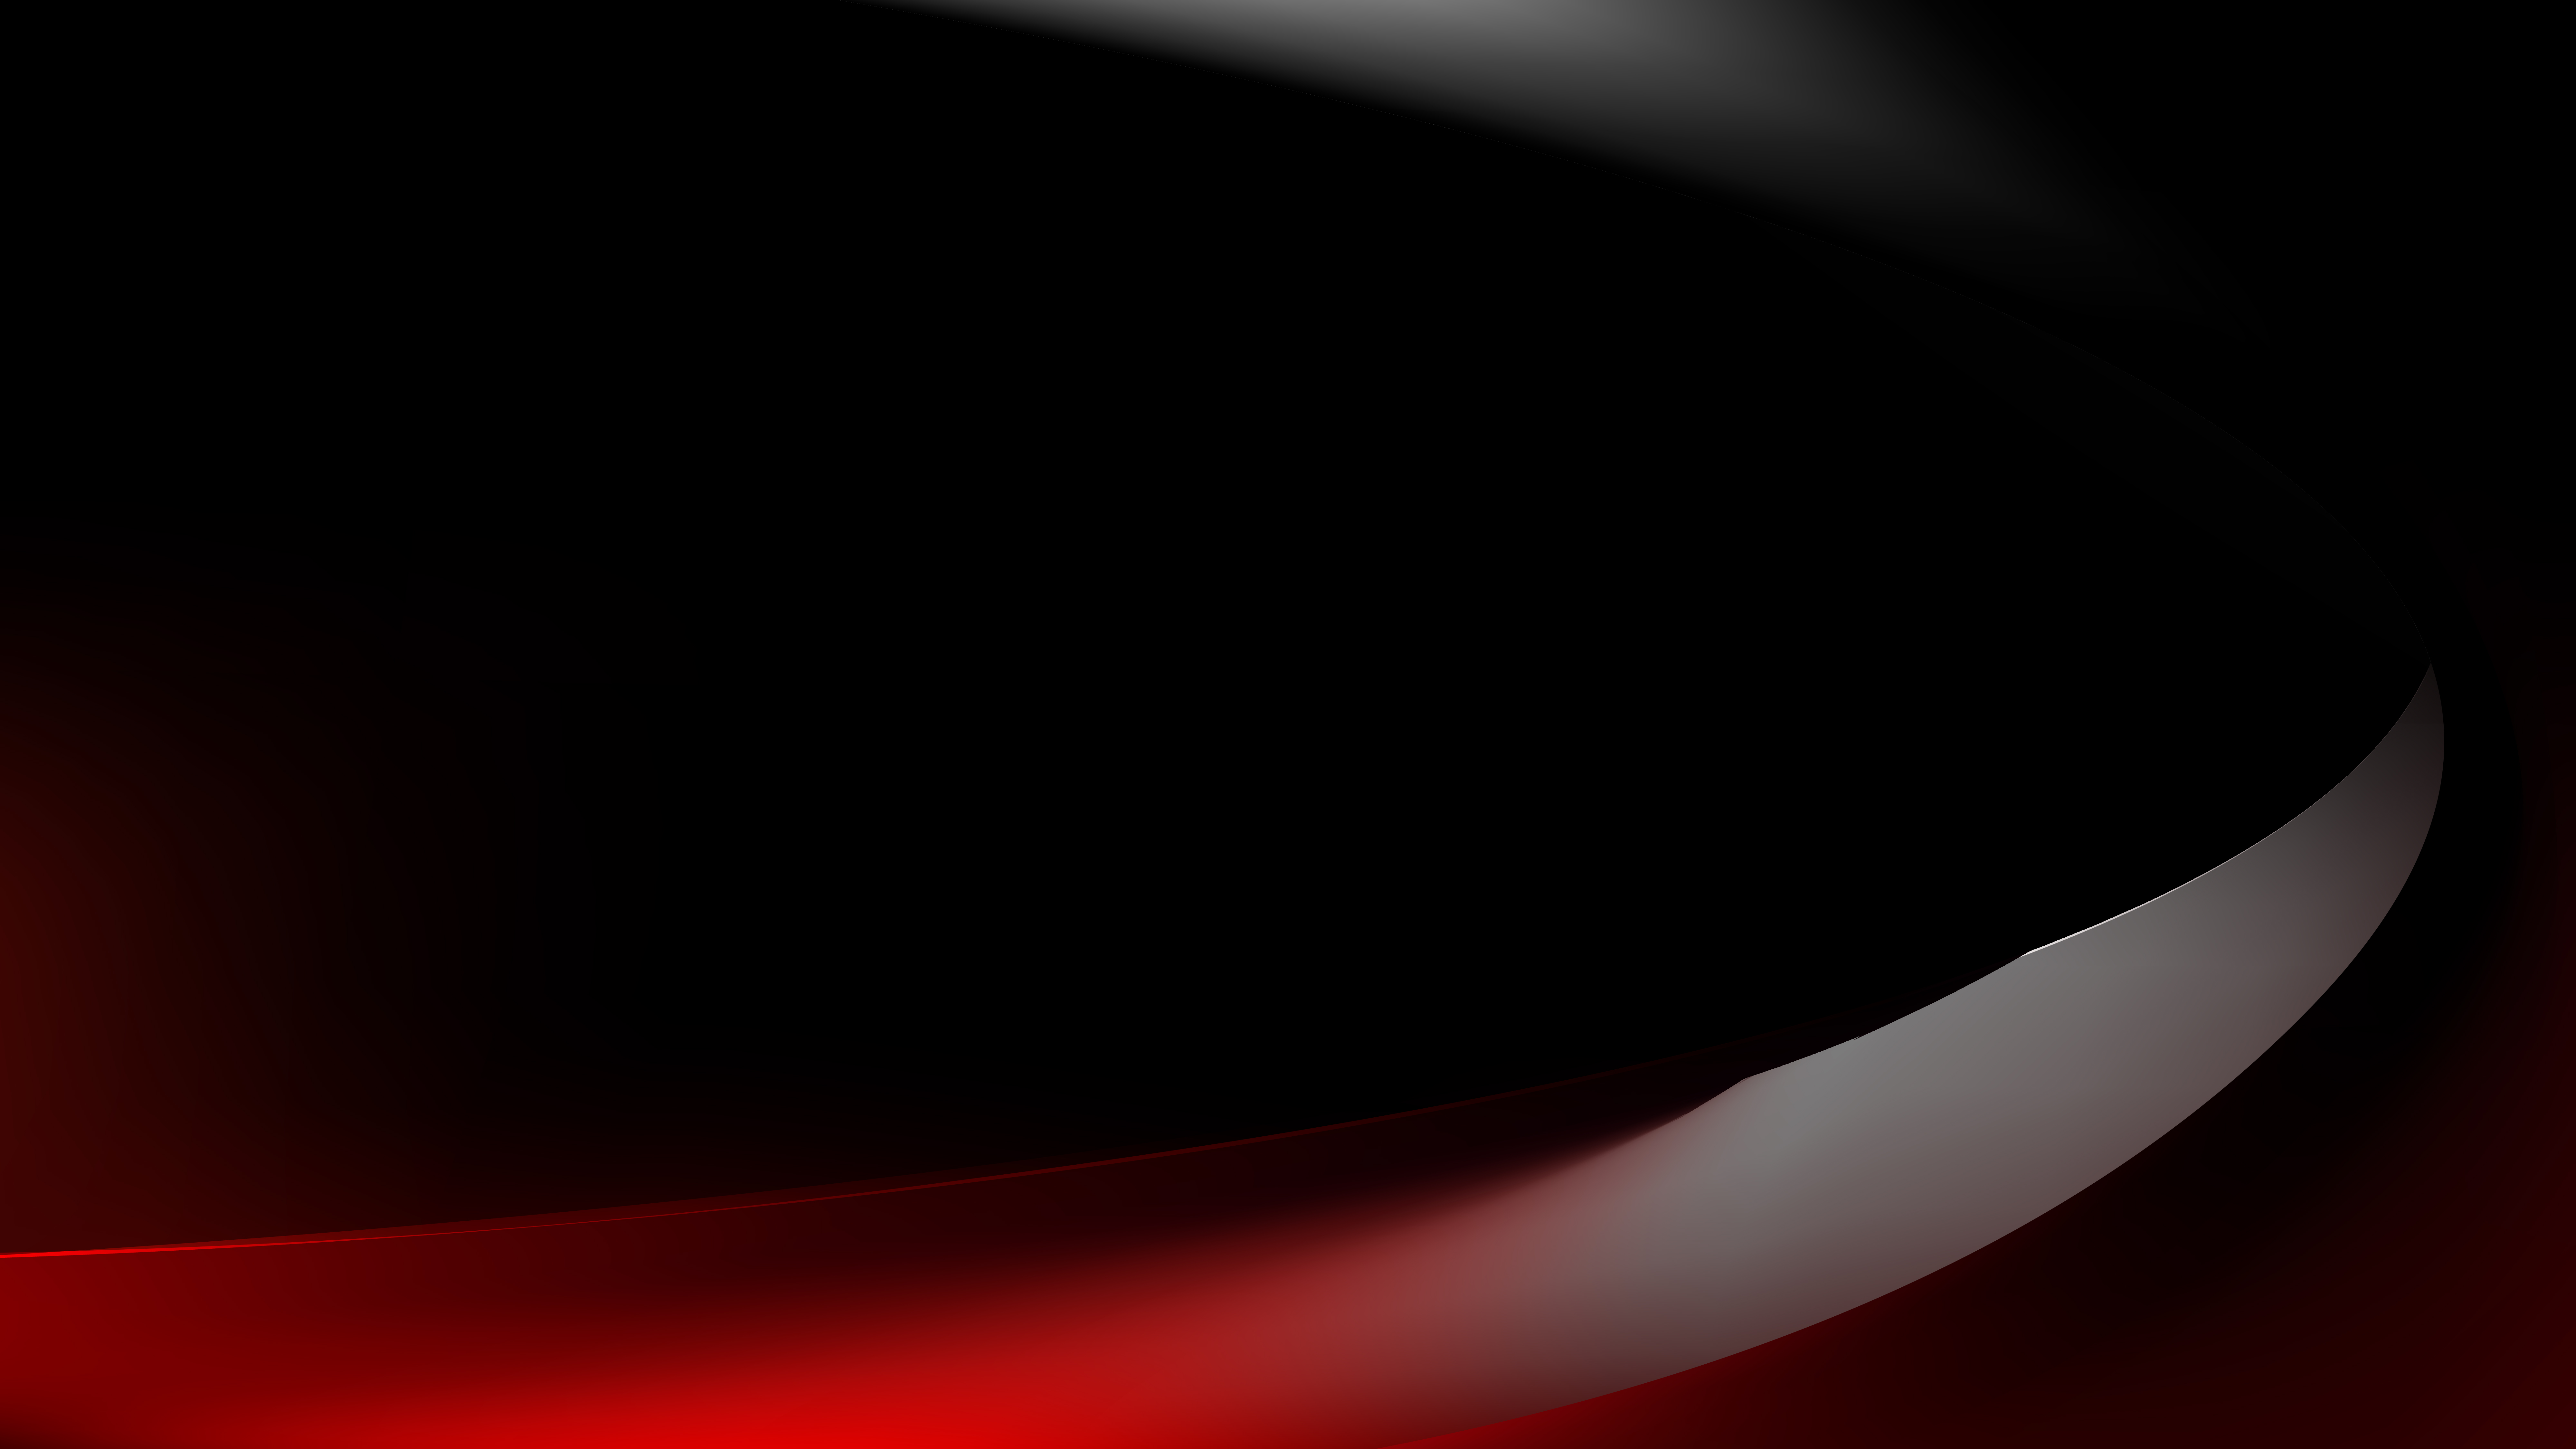 Free Red and Black Curve Background Vector Art